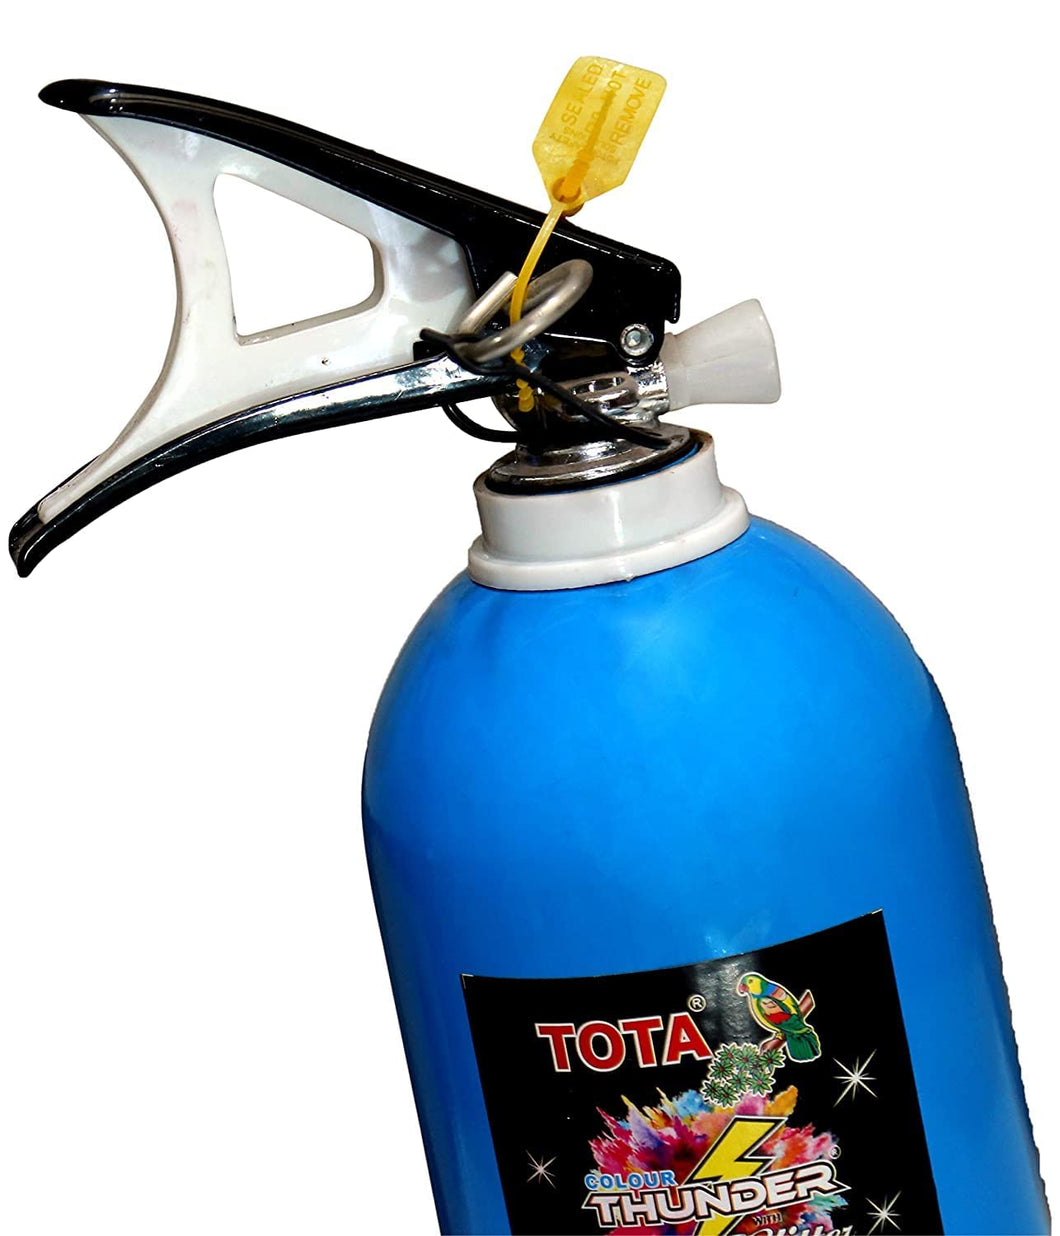 Tota Thunder Single tJet Holi Colour Cloud Gadget-Two Colors One Time Use Holi Cylinder - 2 Kg Natural and Herbal Gulal for Holi and Photoshoots